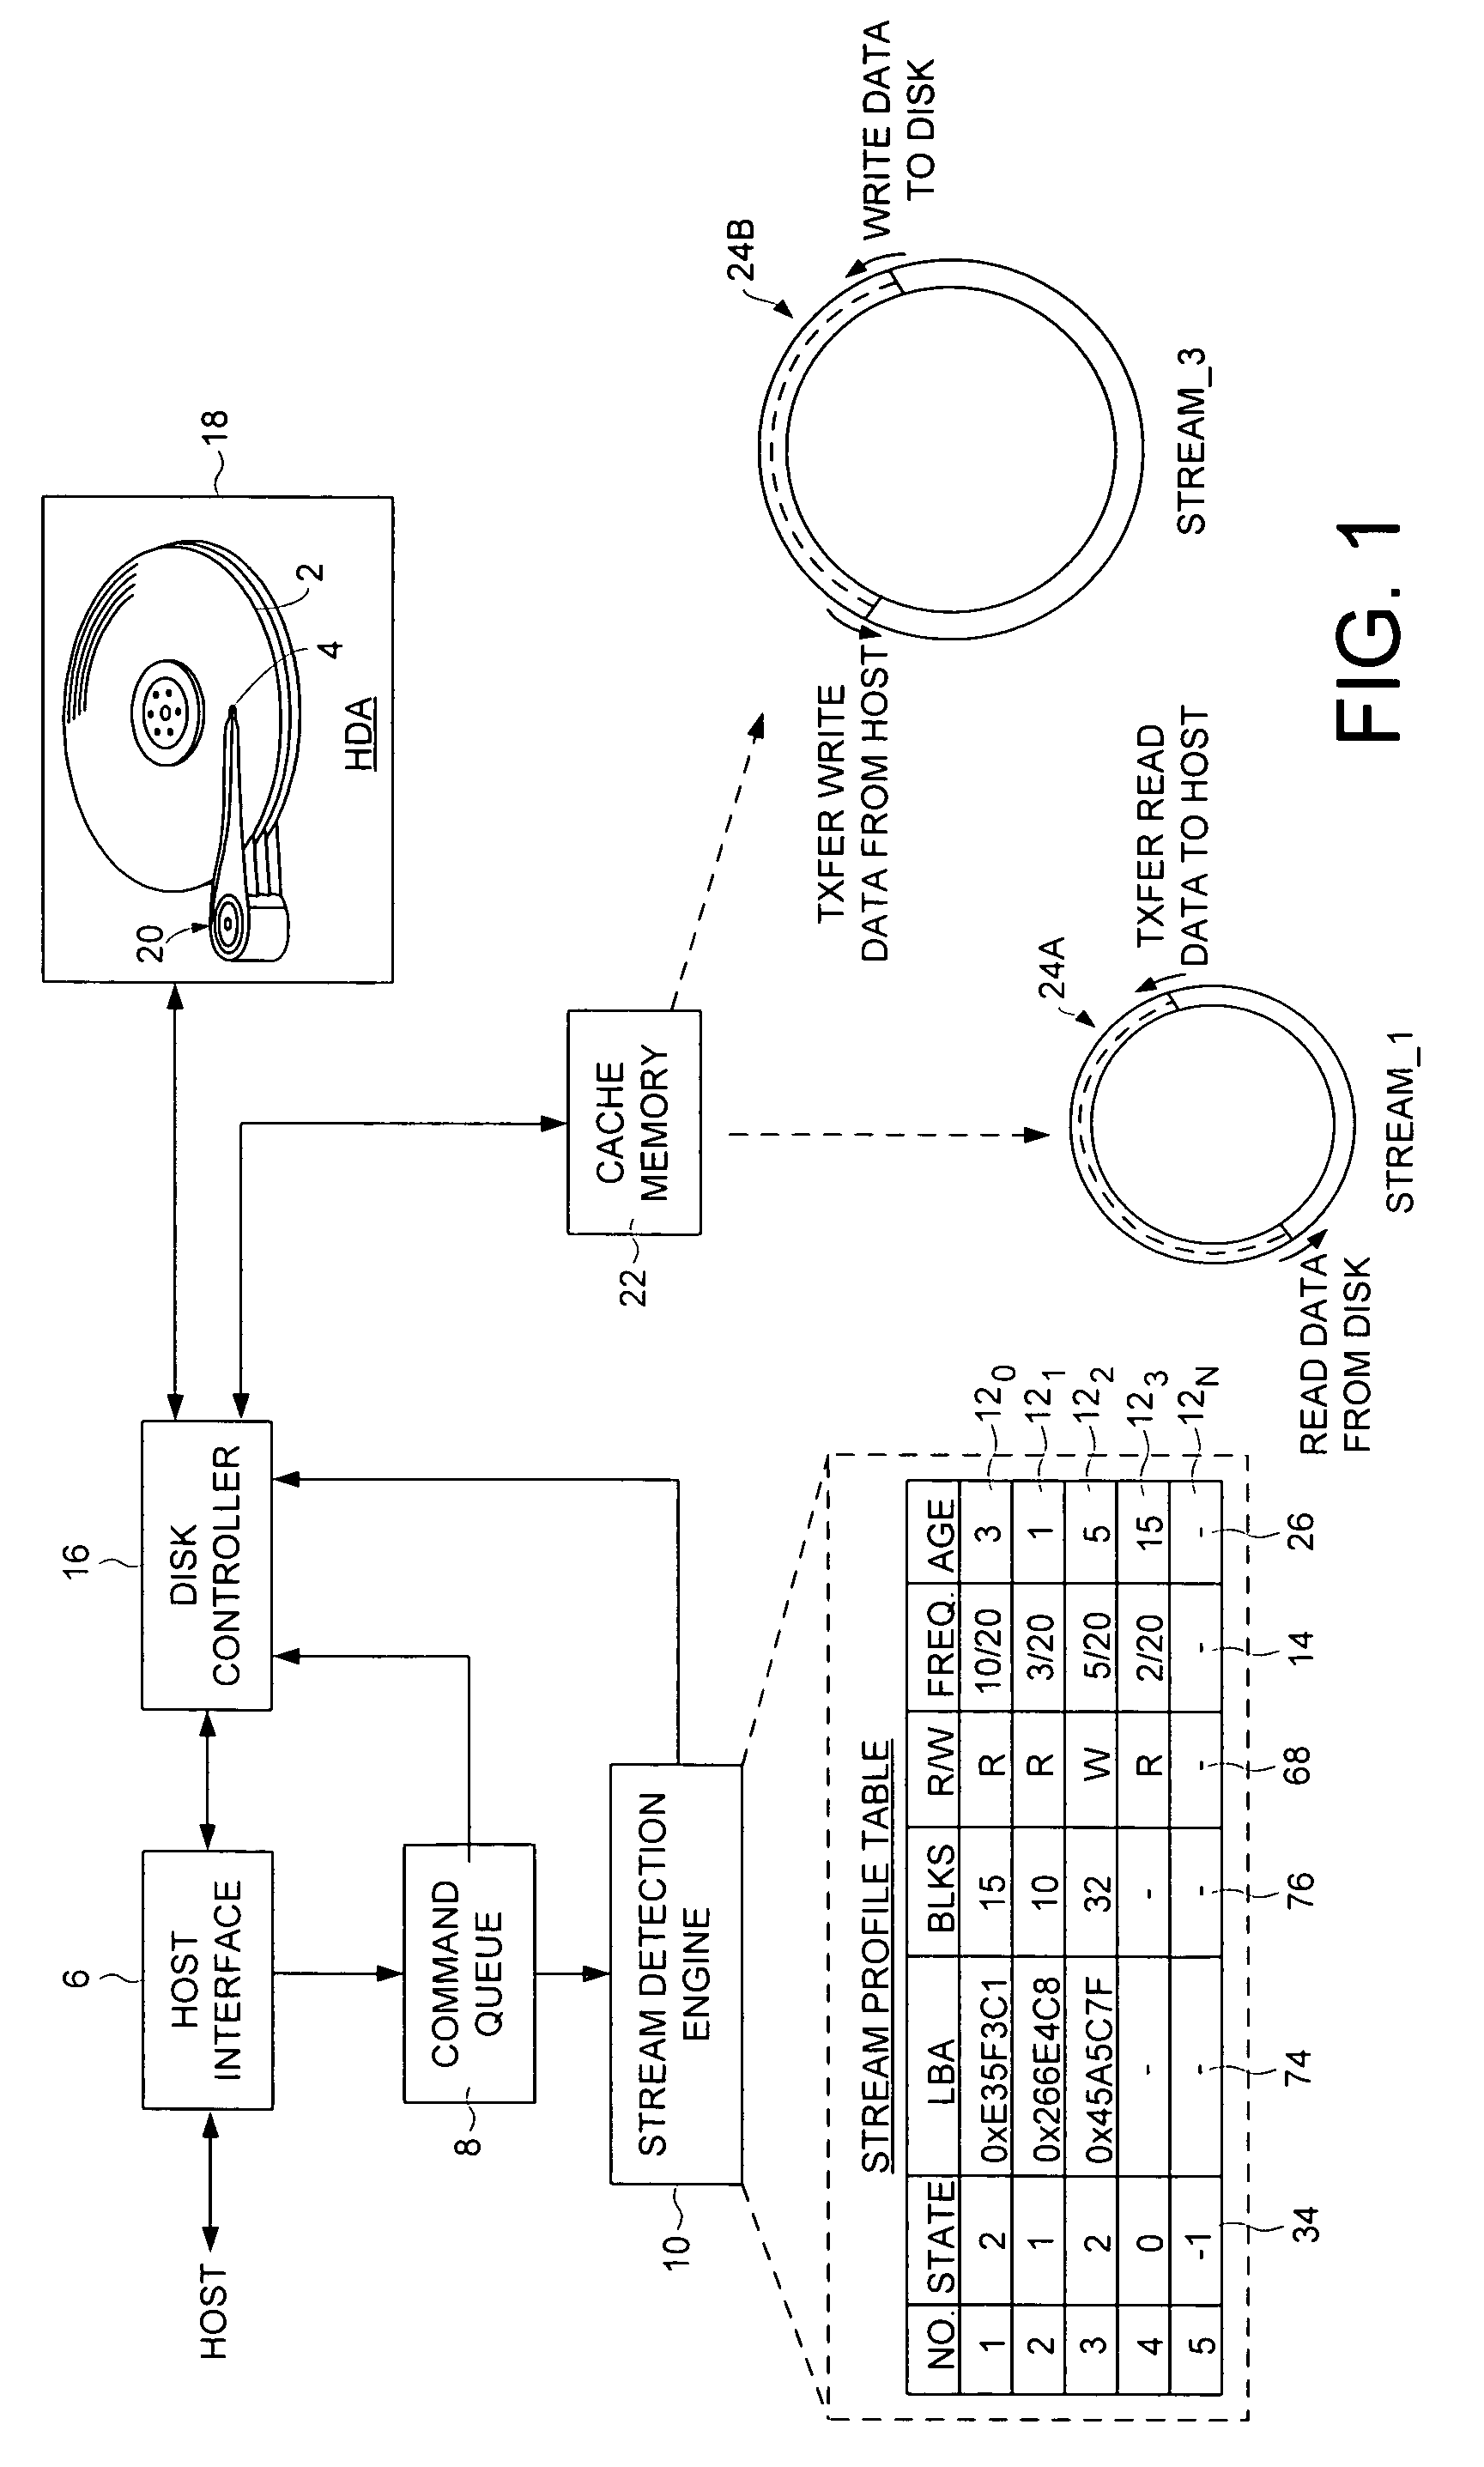 Disk drive employing stream detection engine to enhance cache management policy